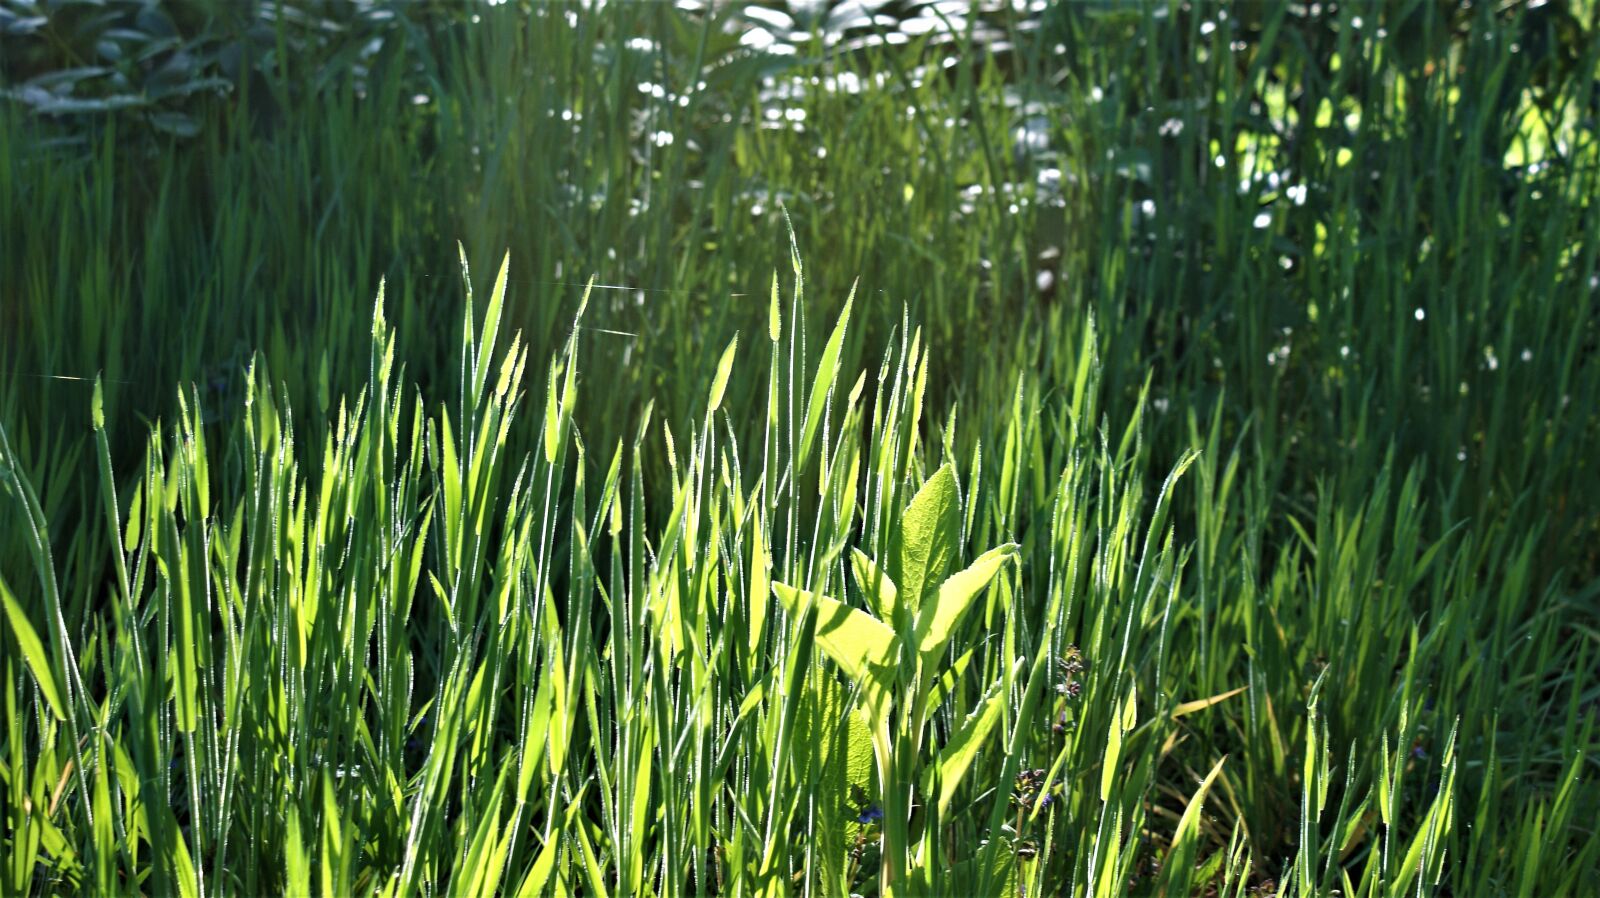 Sony Alpha DSLR-A350 sample photo. Grass, forest, nature photography